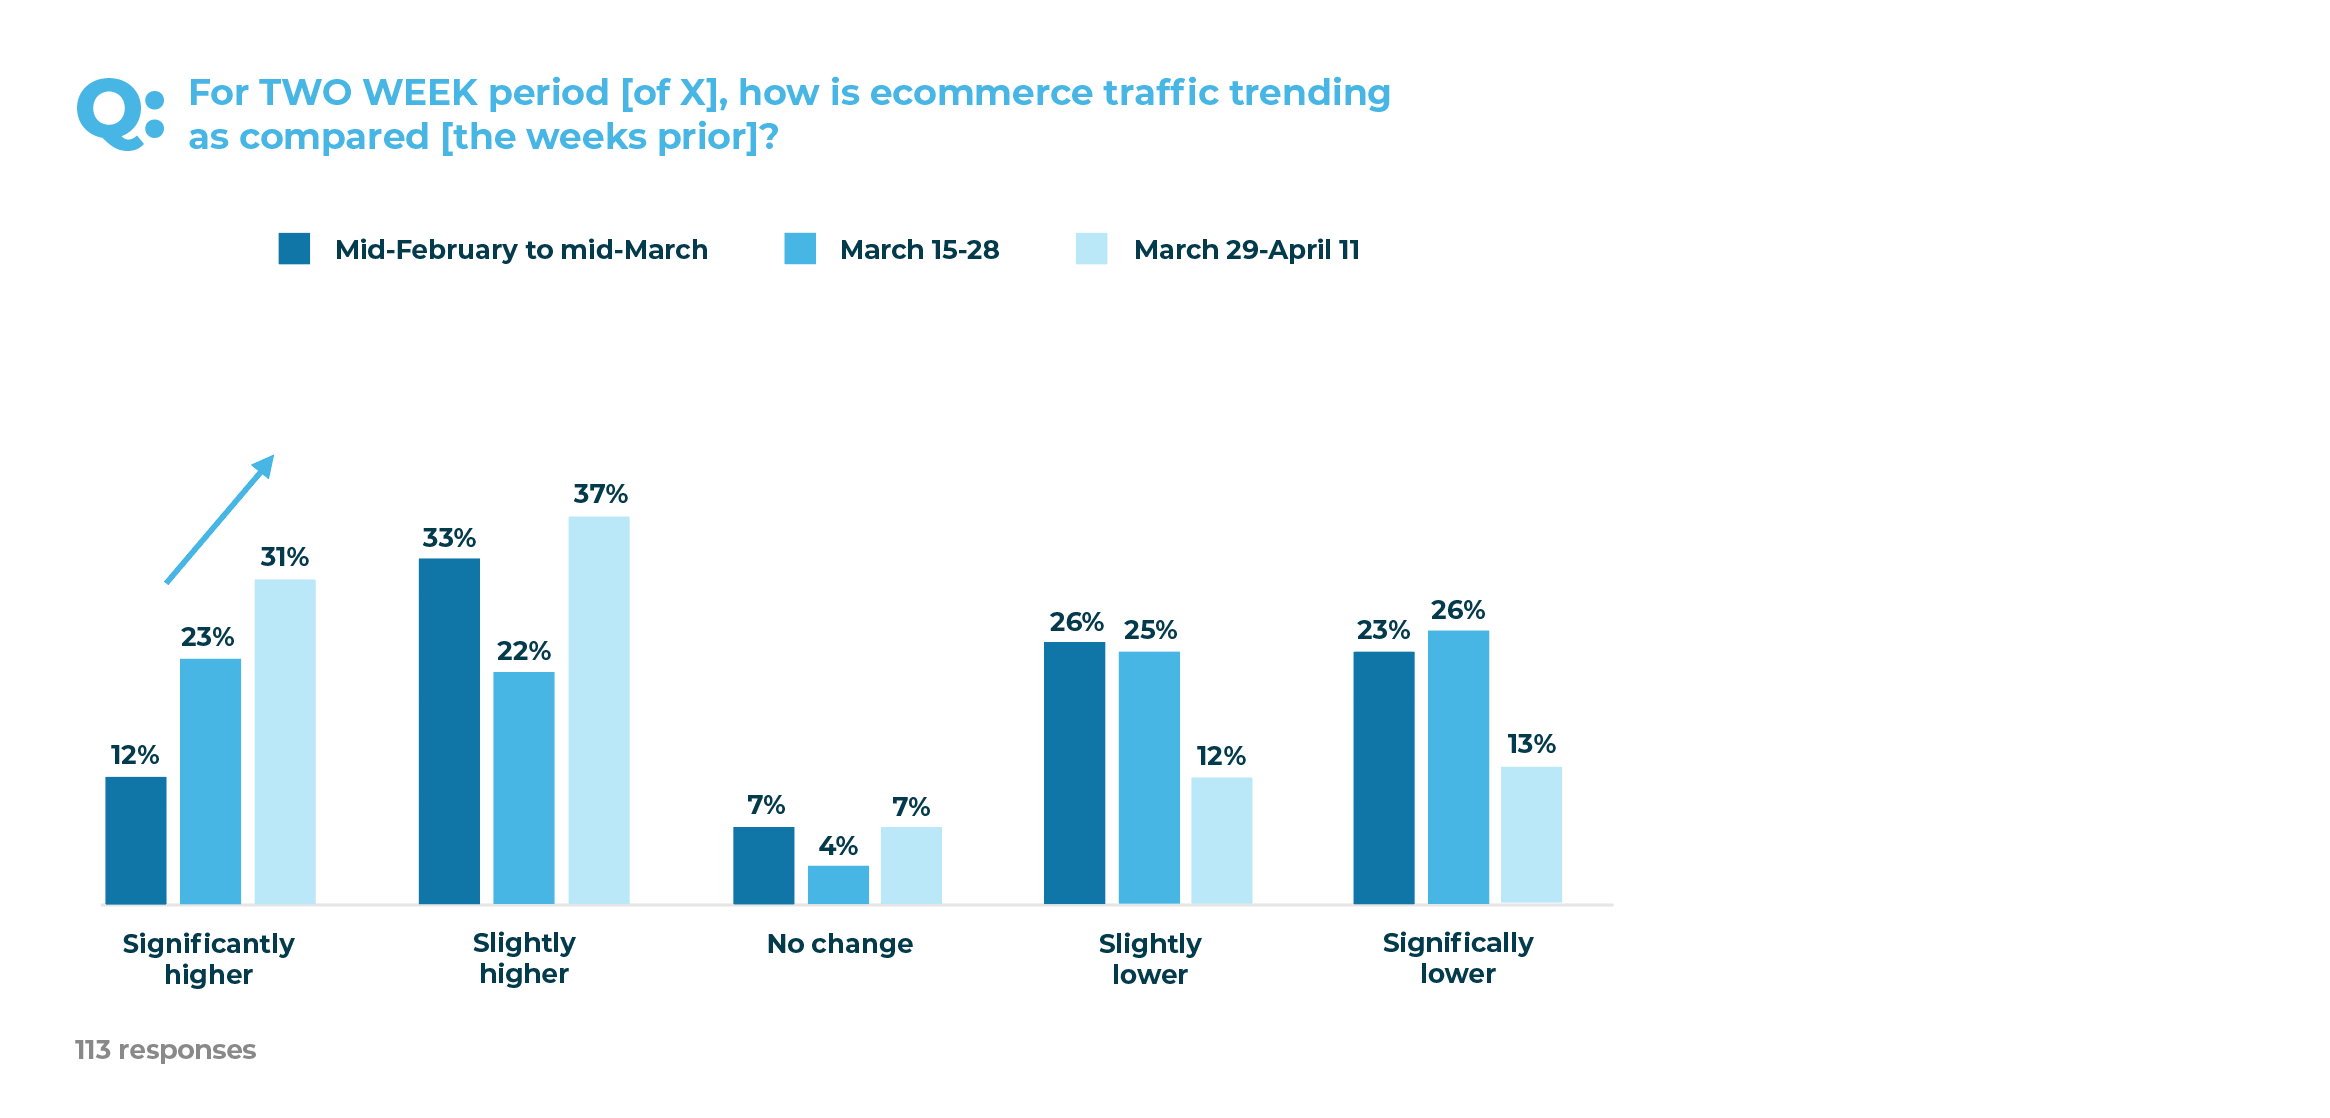 For TWO WEEK period, how is ecommerce traffic trending as compared [the weeks prior]? 